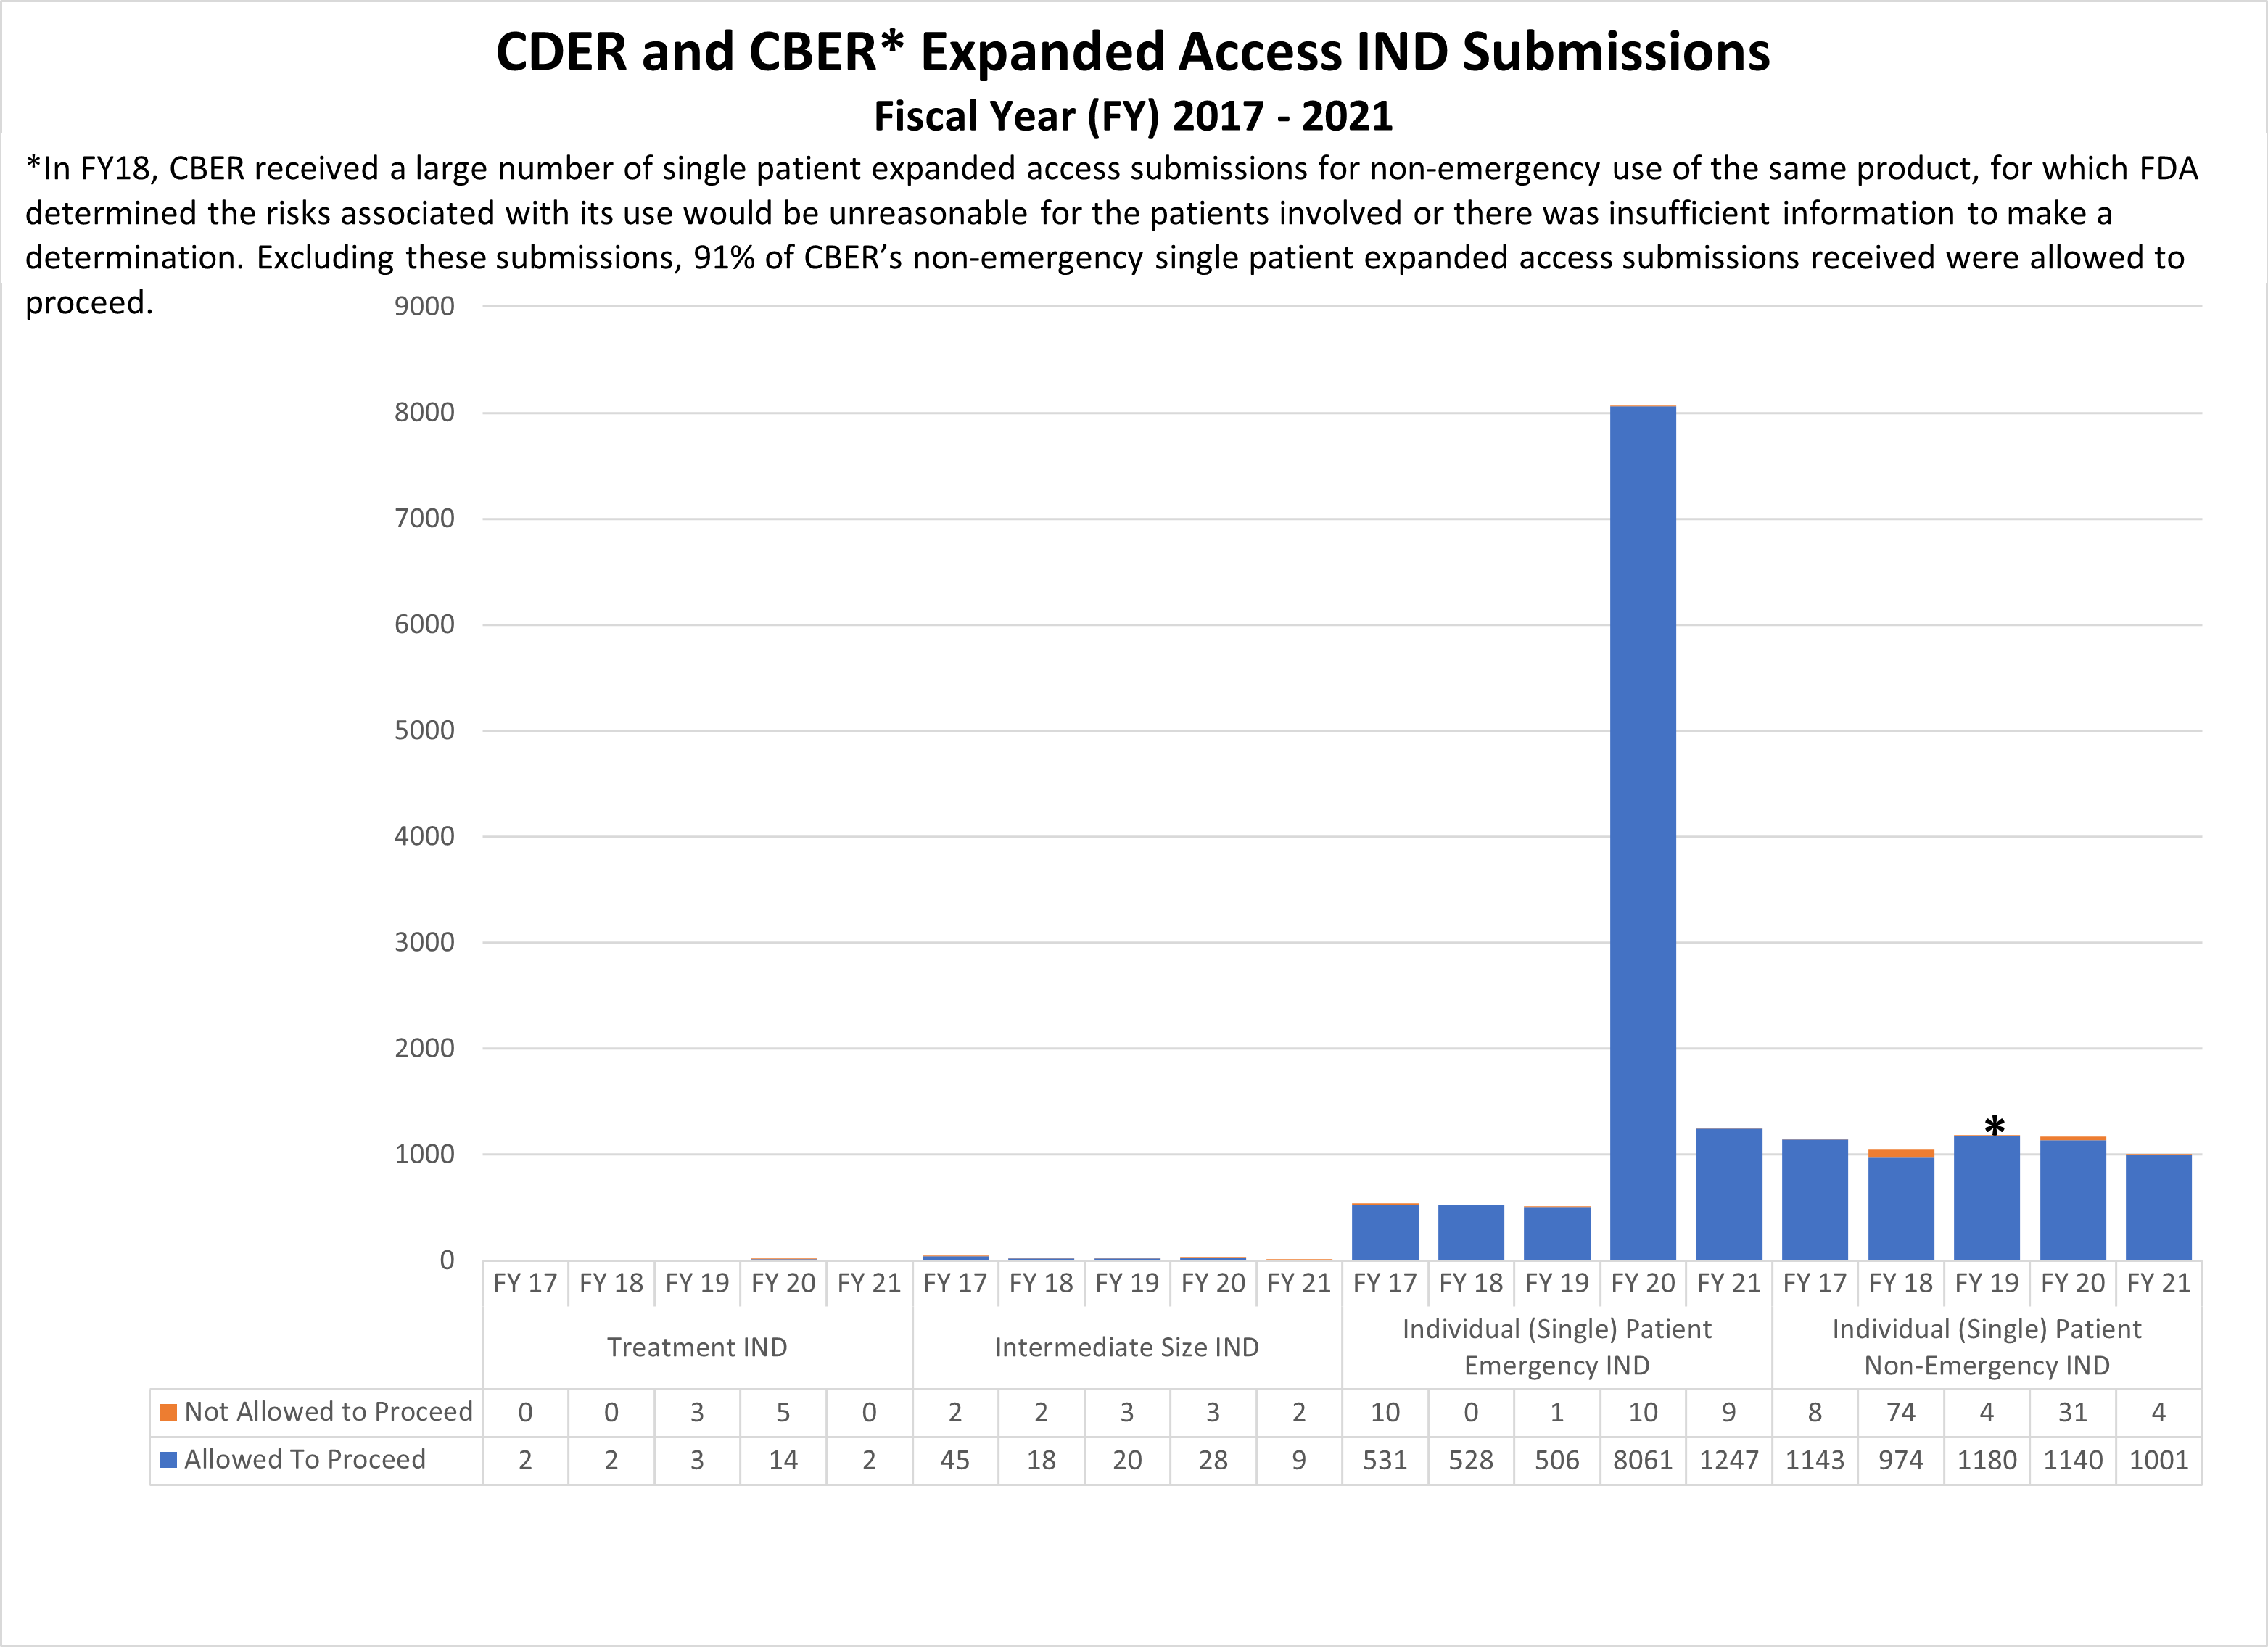 Combined CDER and CBER Expanded Access IND Submissions (2017-2021)